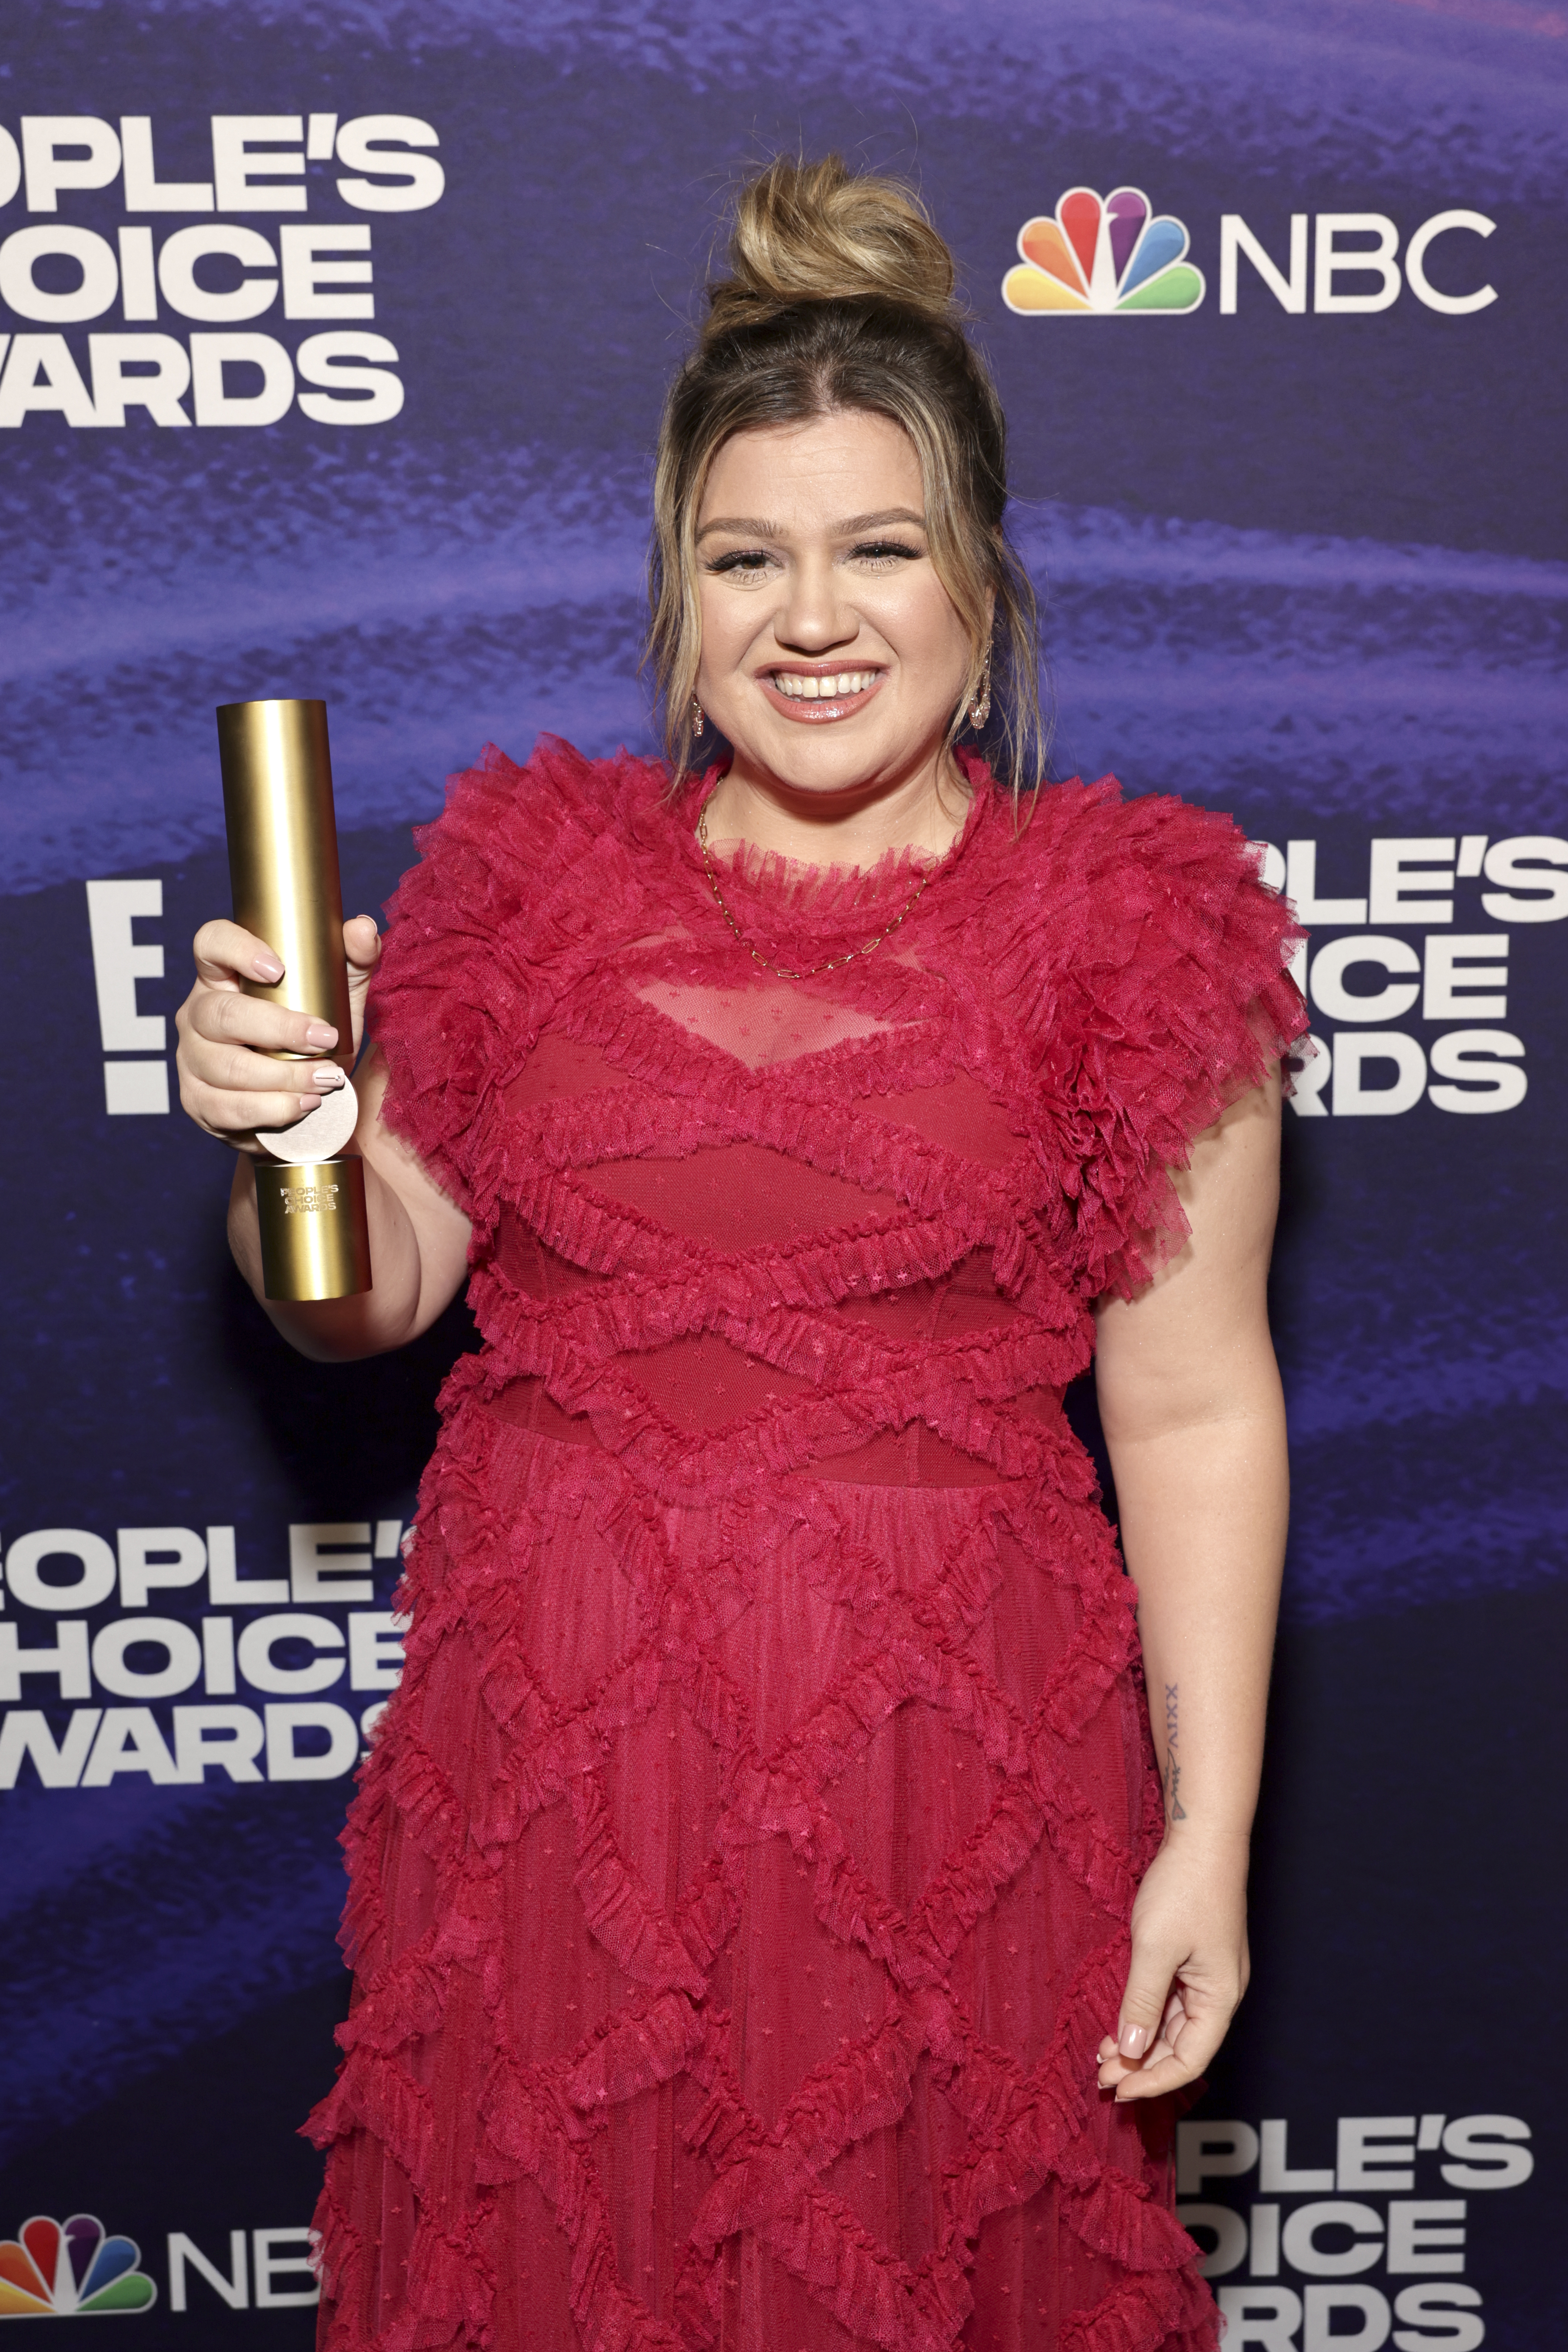 Kelly Clarkson poses backstage during the 2022 People's Choice Awards at the Barker Hangar on December 6, 2022 in Santa Monica, California. | Source: Getty Images